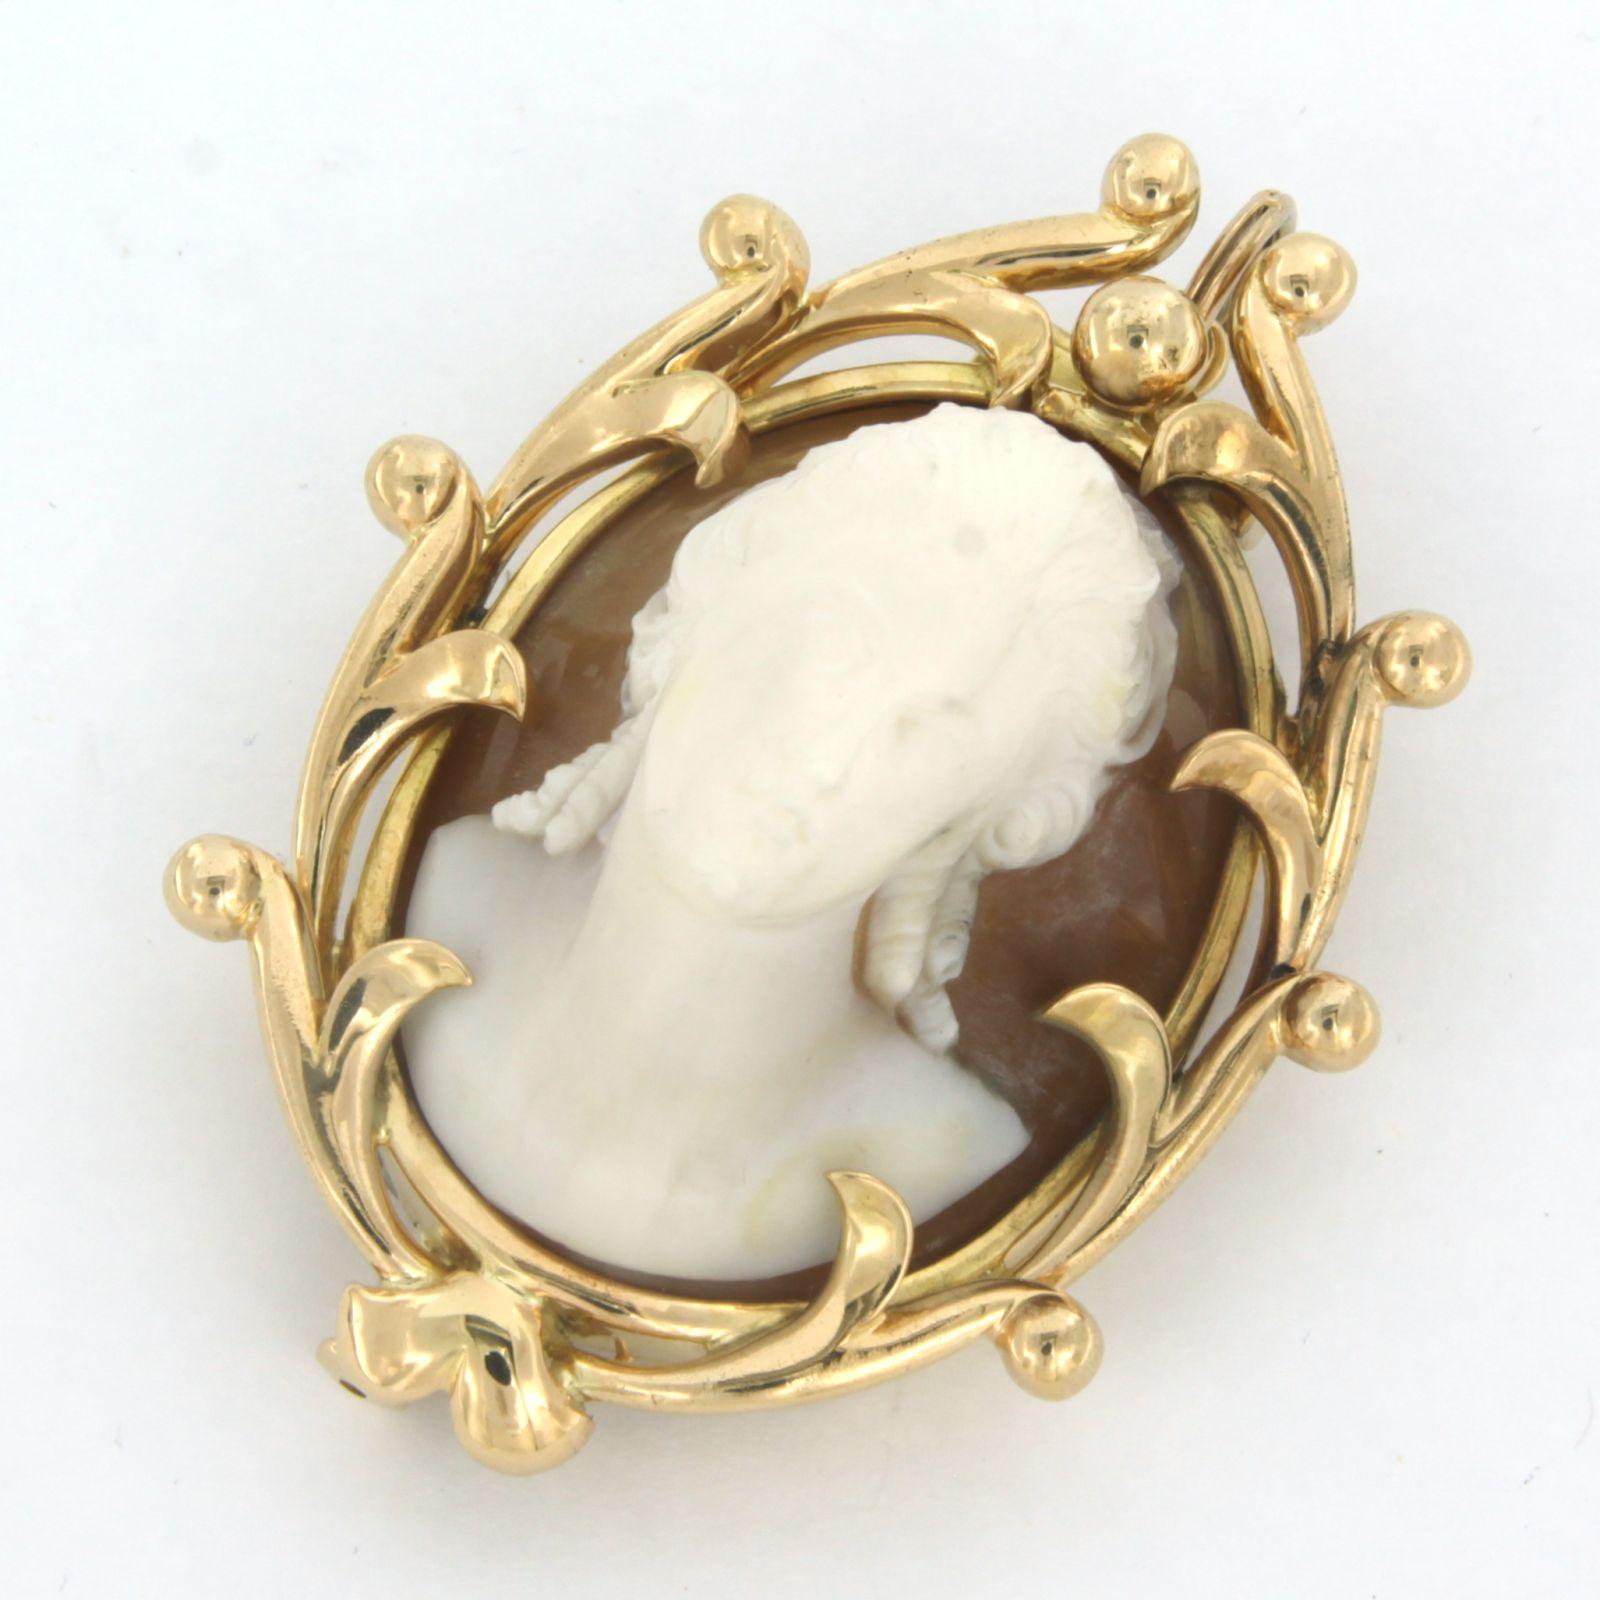 18k yellow gold cameo – size 4.9 cm x 3.8 cm

Detailed description

the size of the brooch is 4.9 cm long by 3.8 cm wide

weight 26.1 grams

set with

- 1 x 3.2 cm x 2.3 cm oval cut cameo

color brown white
purity….
Gemstones have often been treated